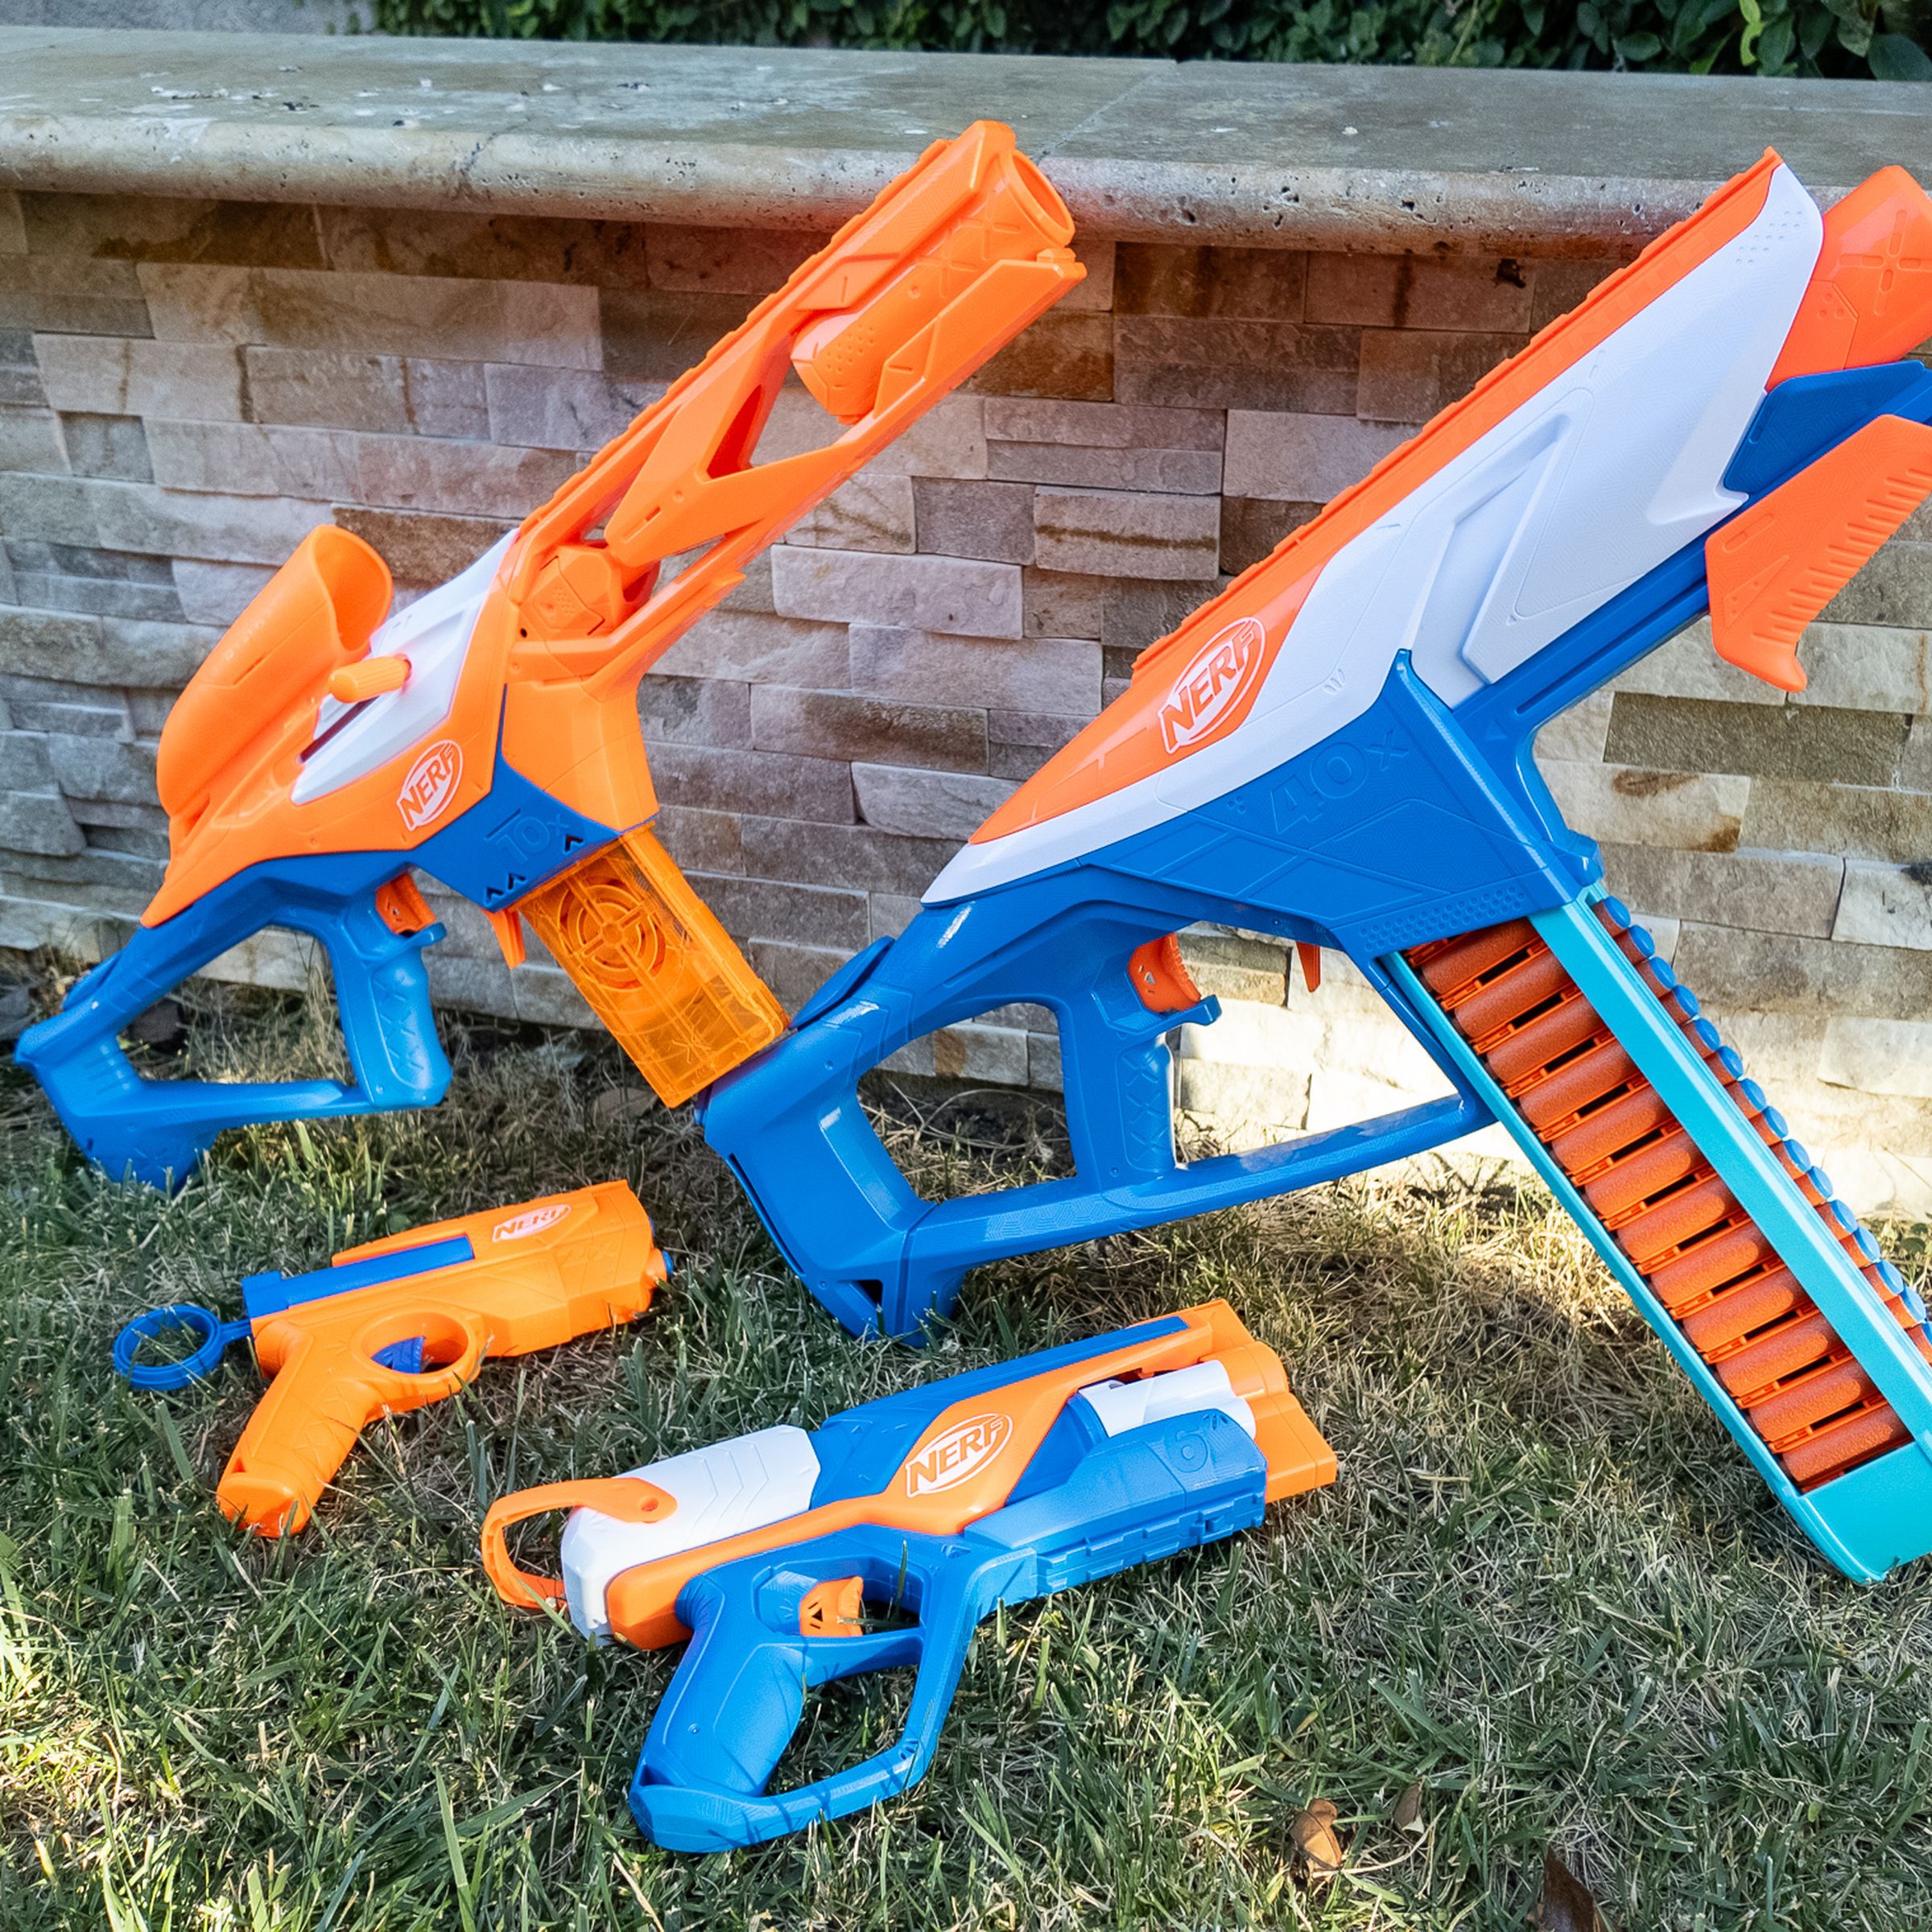 The first four Nerf N-Series blasters shipped to reviewers.